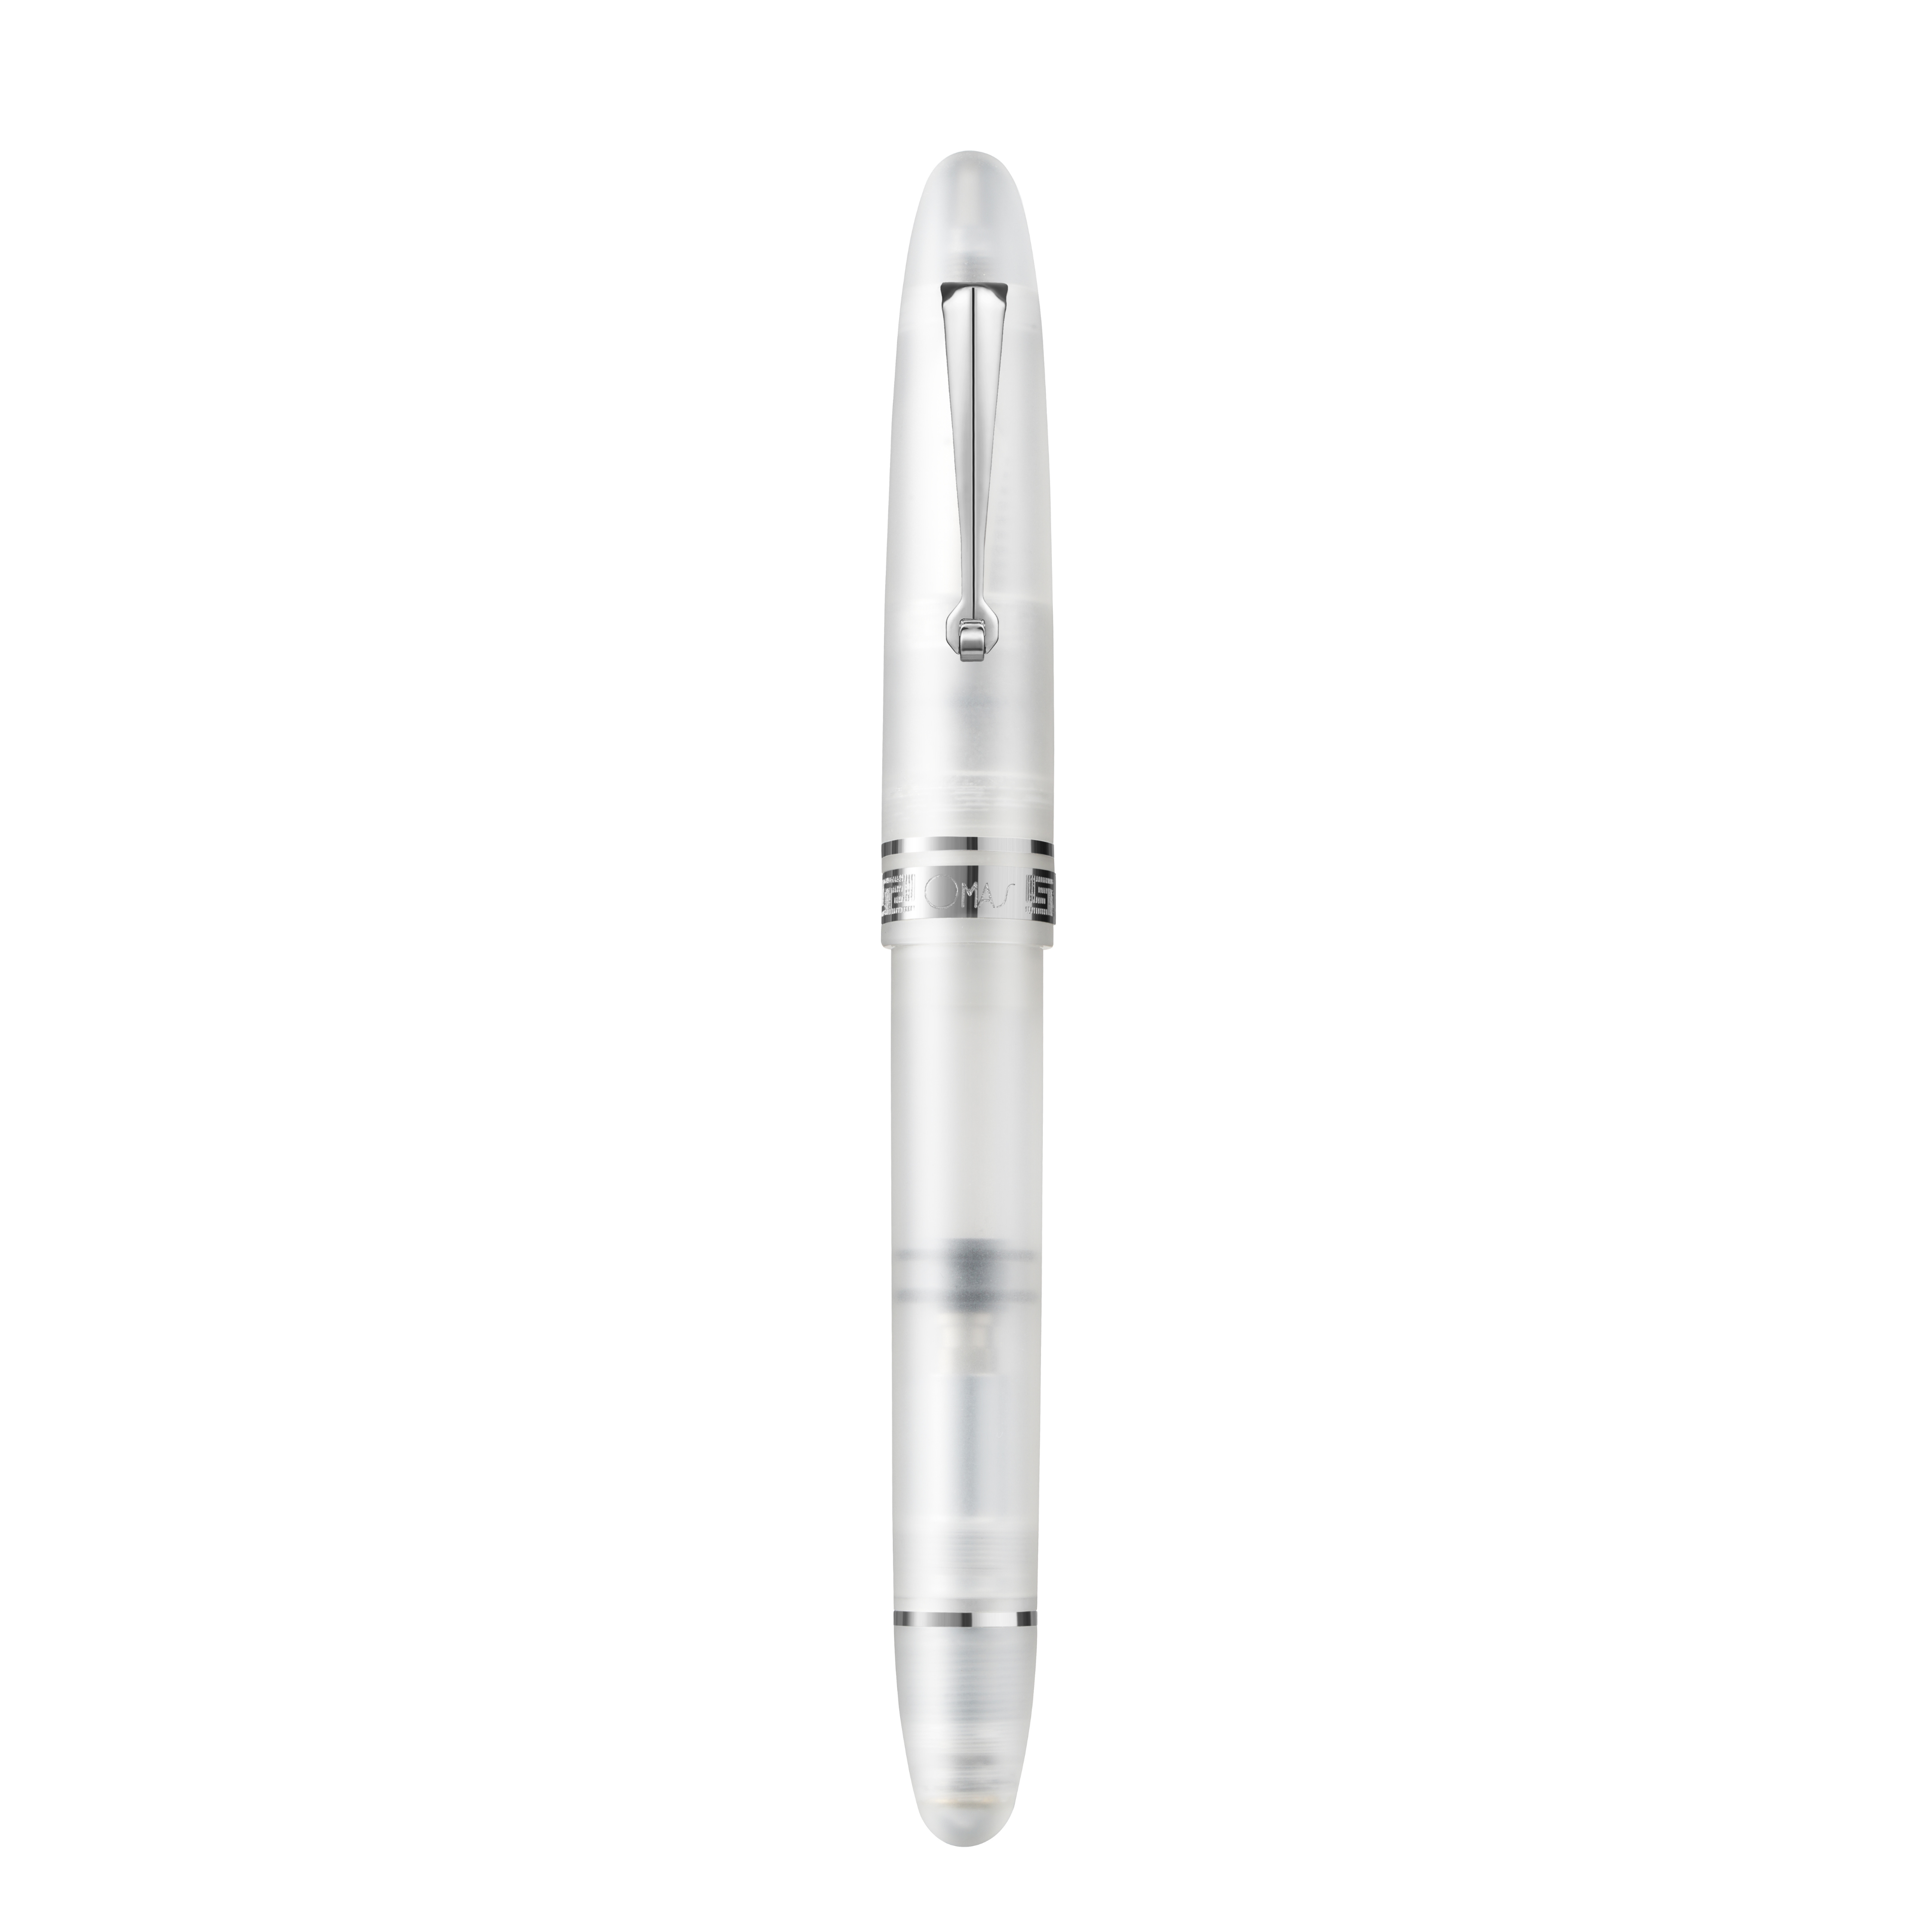 Omas Ogiva Demonstrator Fountain Pen with Silver Trim